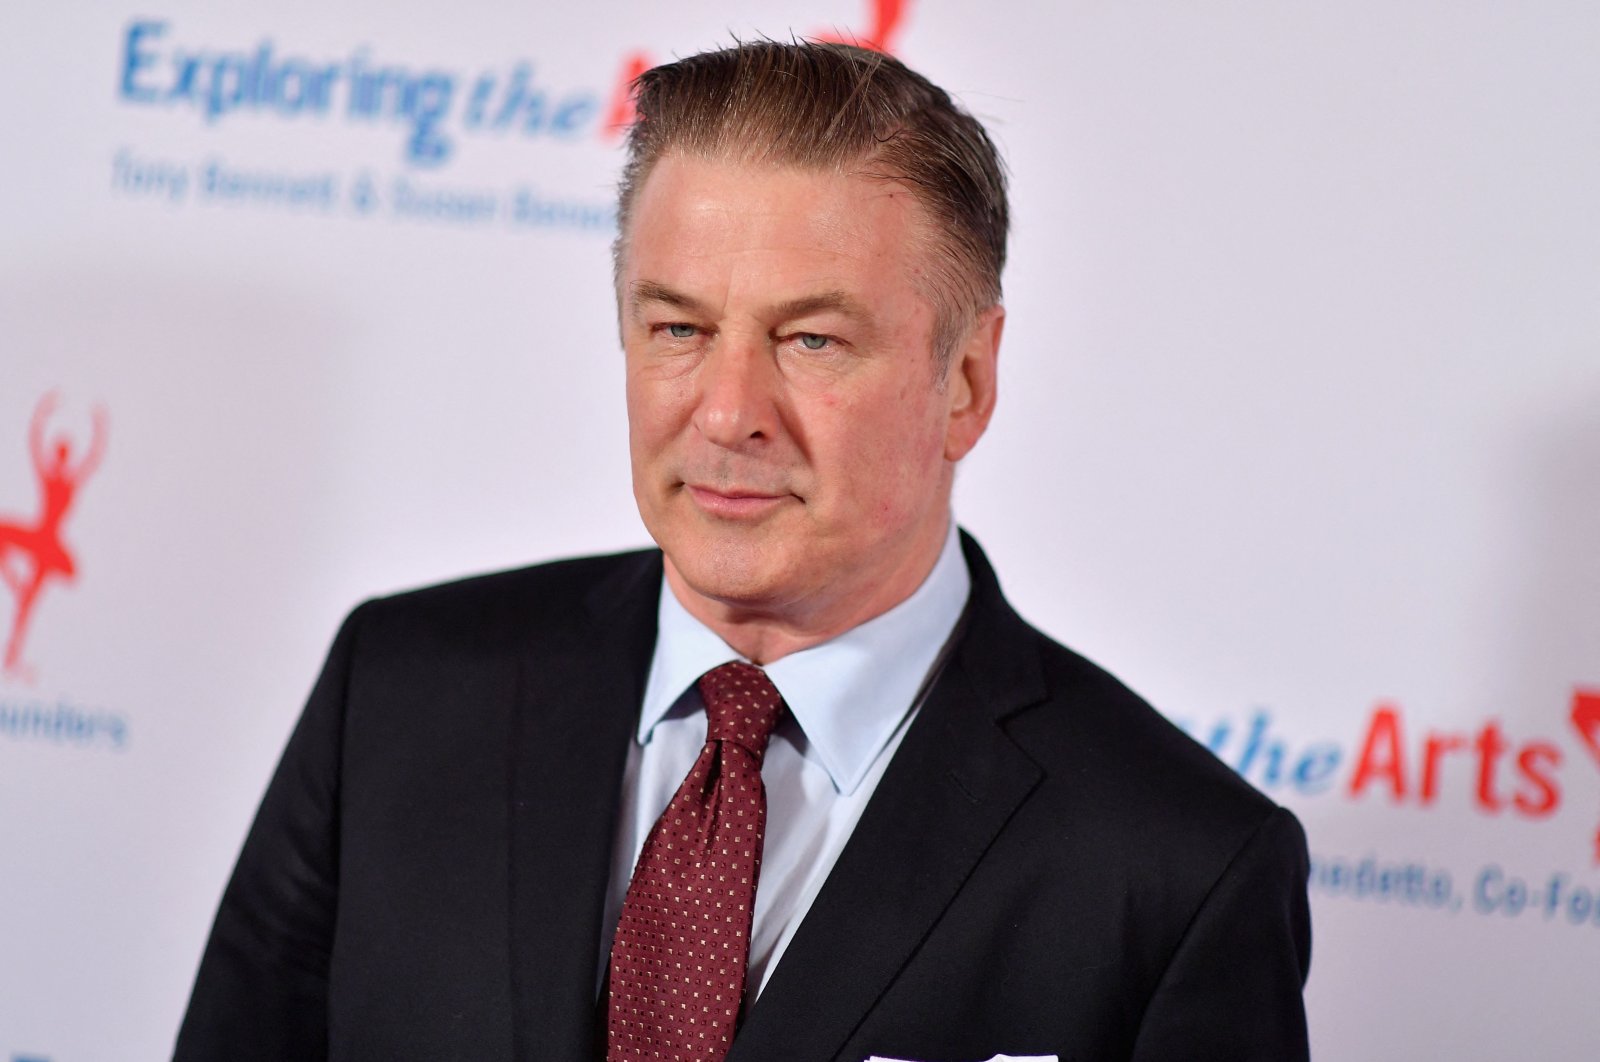 Actor Alec Baldwin attends the "Exploring the Arts" 20th anniversary gala in New York City, U.S., April 12, 2019. (AFP Photo)